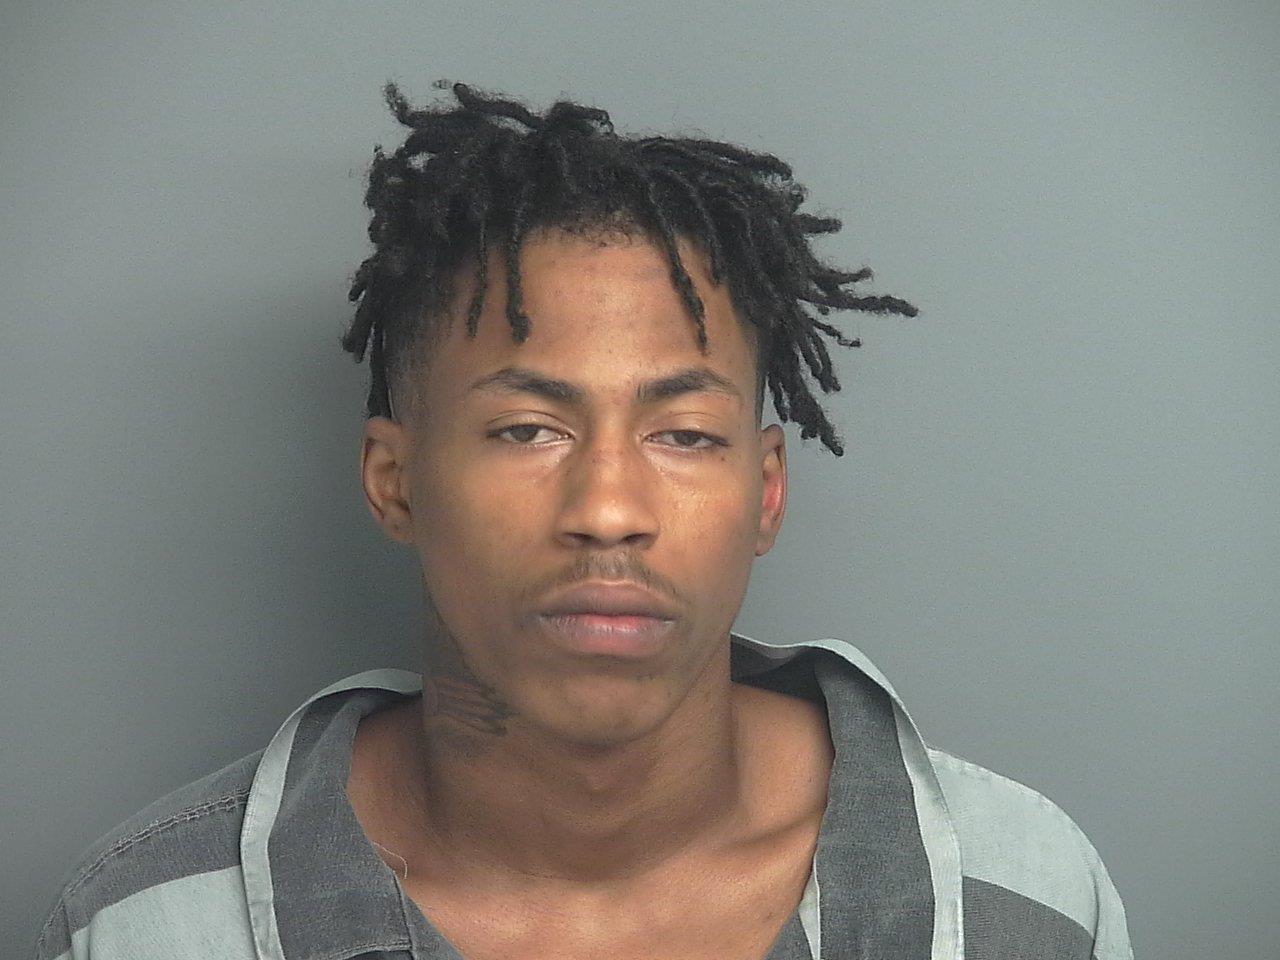 MONTGOMERY COUNTY JAIL BOOKINGS FOR 7/13/19